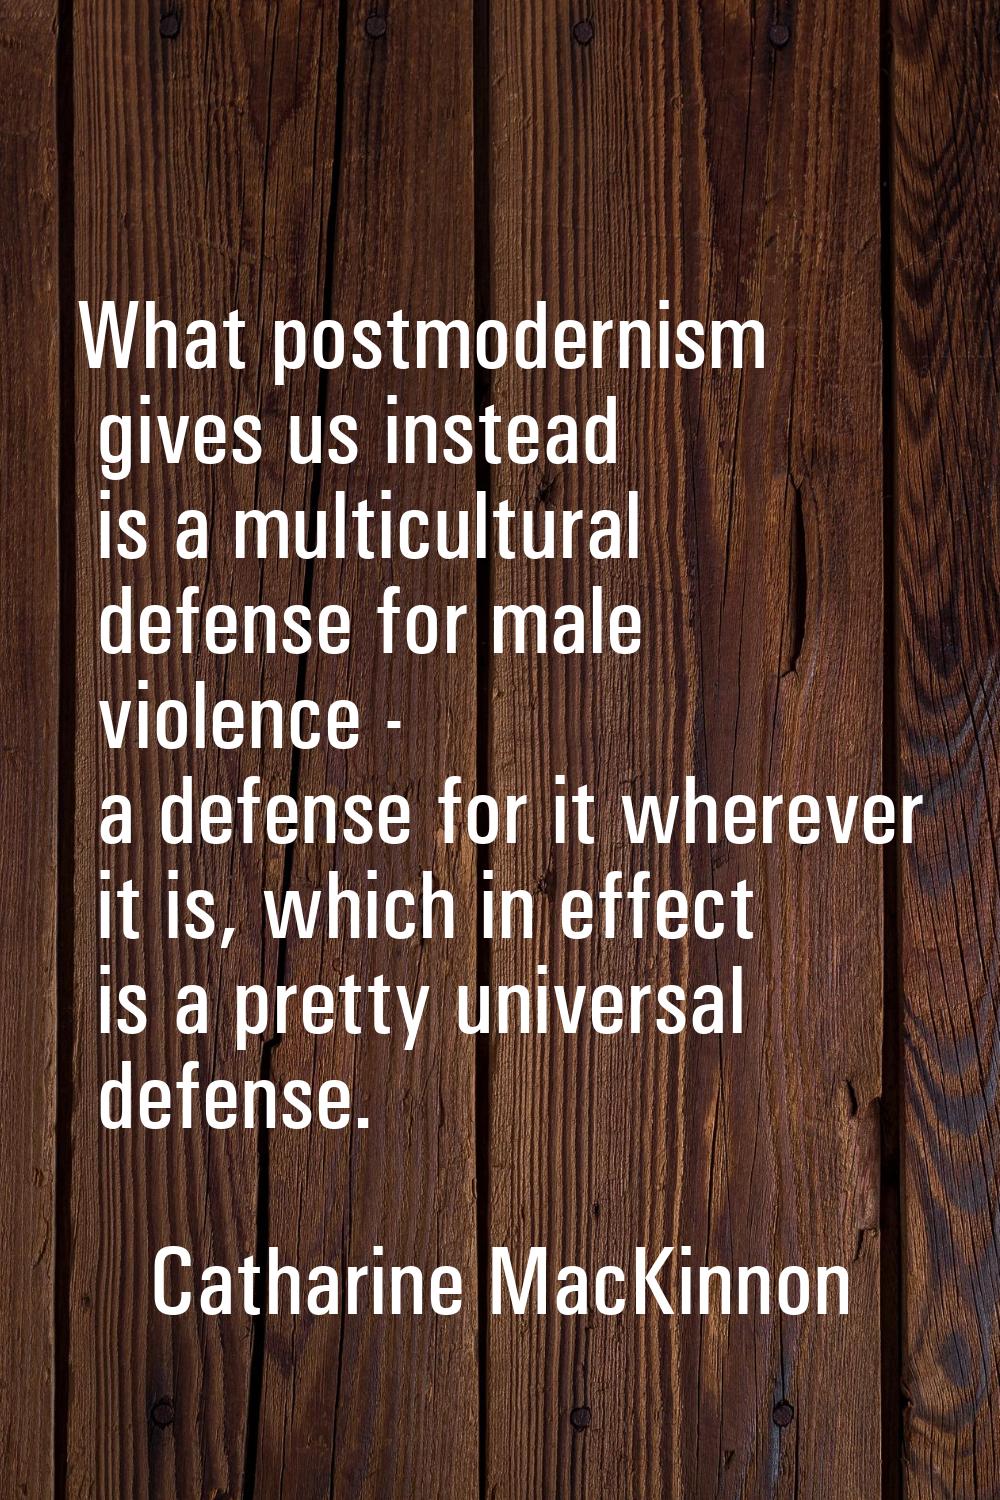 What postmodernism gives us instead is a multicultural defense for male violence - a defense for it